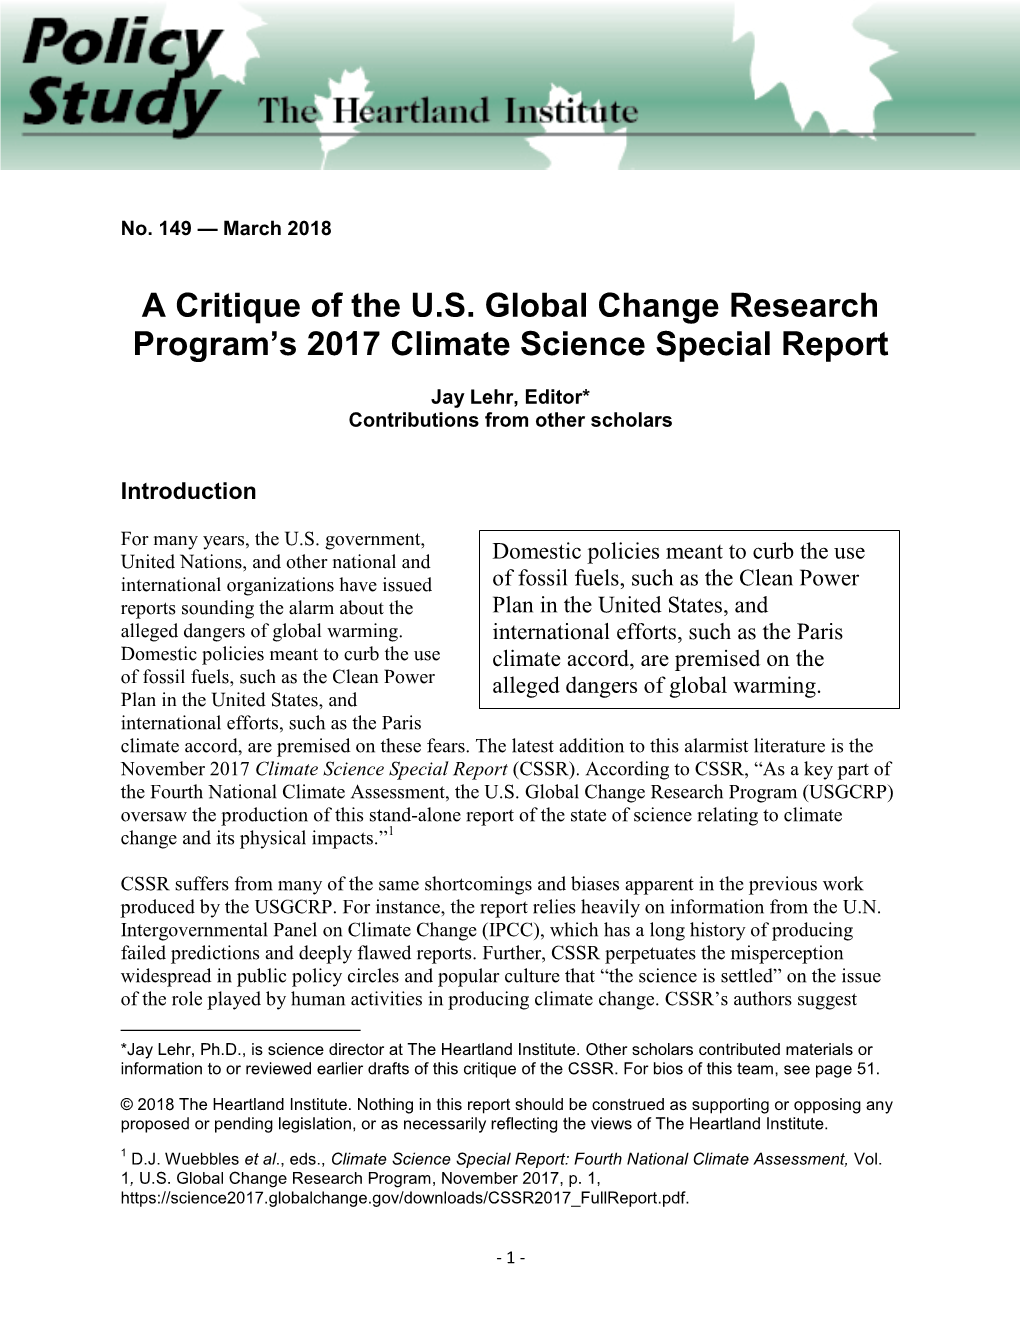 A Critique of the U.S. Global Change Research Program's 2017